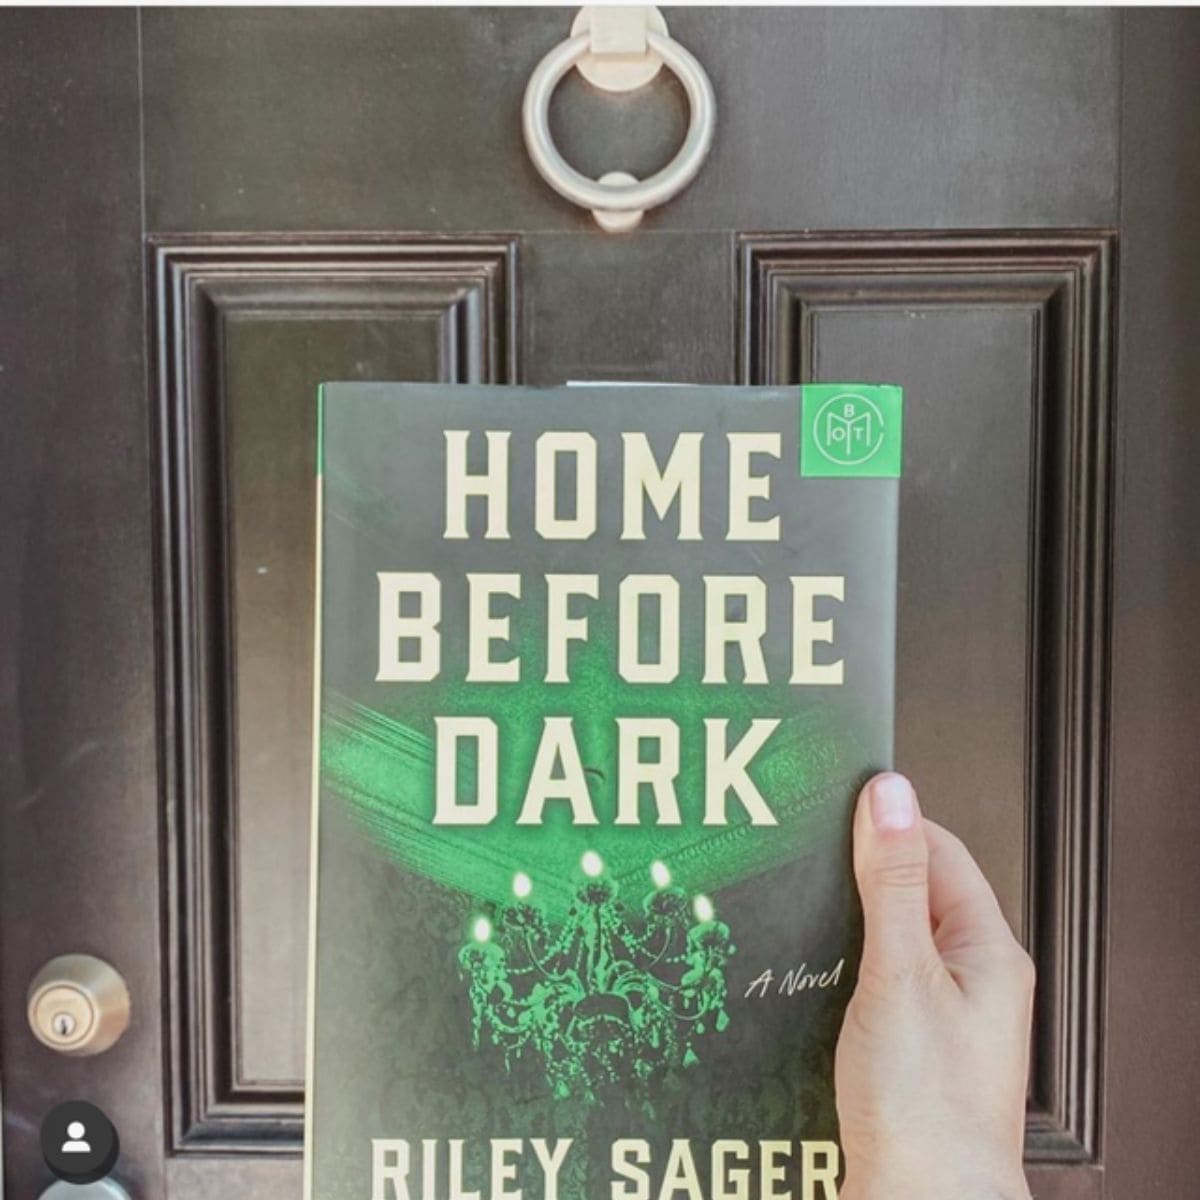 All Riley Sager Books Ranked with Reviews (+ PDF)